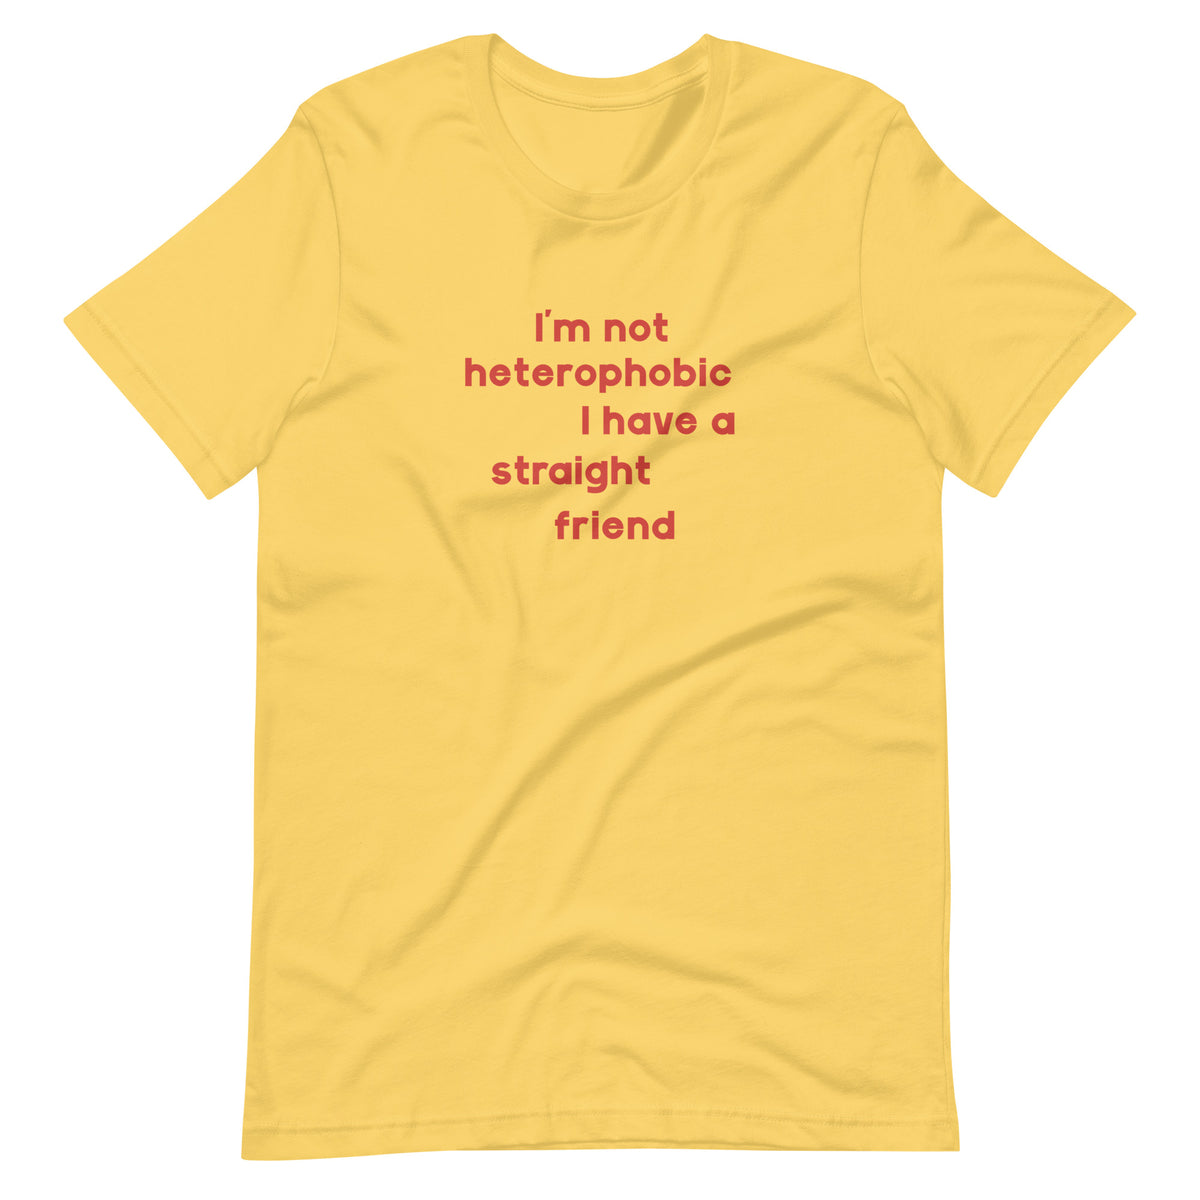  I'm Not Wearing A Bra Today Lingerie Funny T-Shirt Tee :  Clothing, Shoes & Jewelry